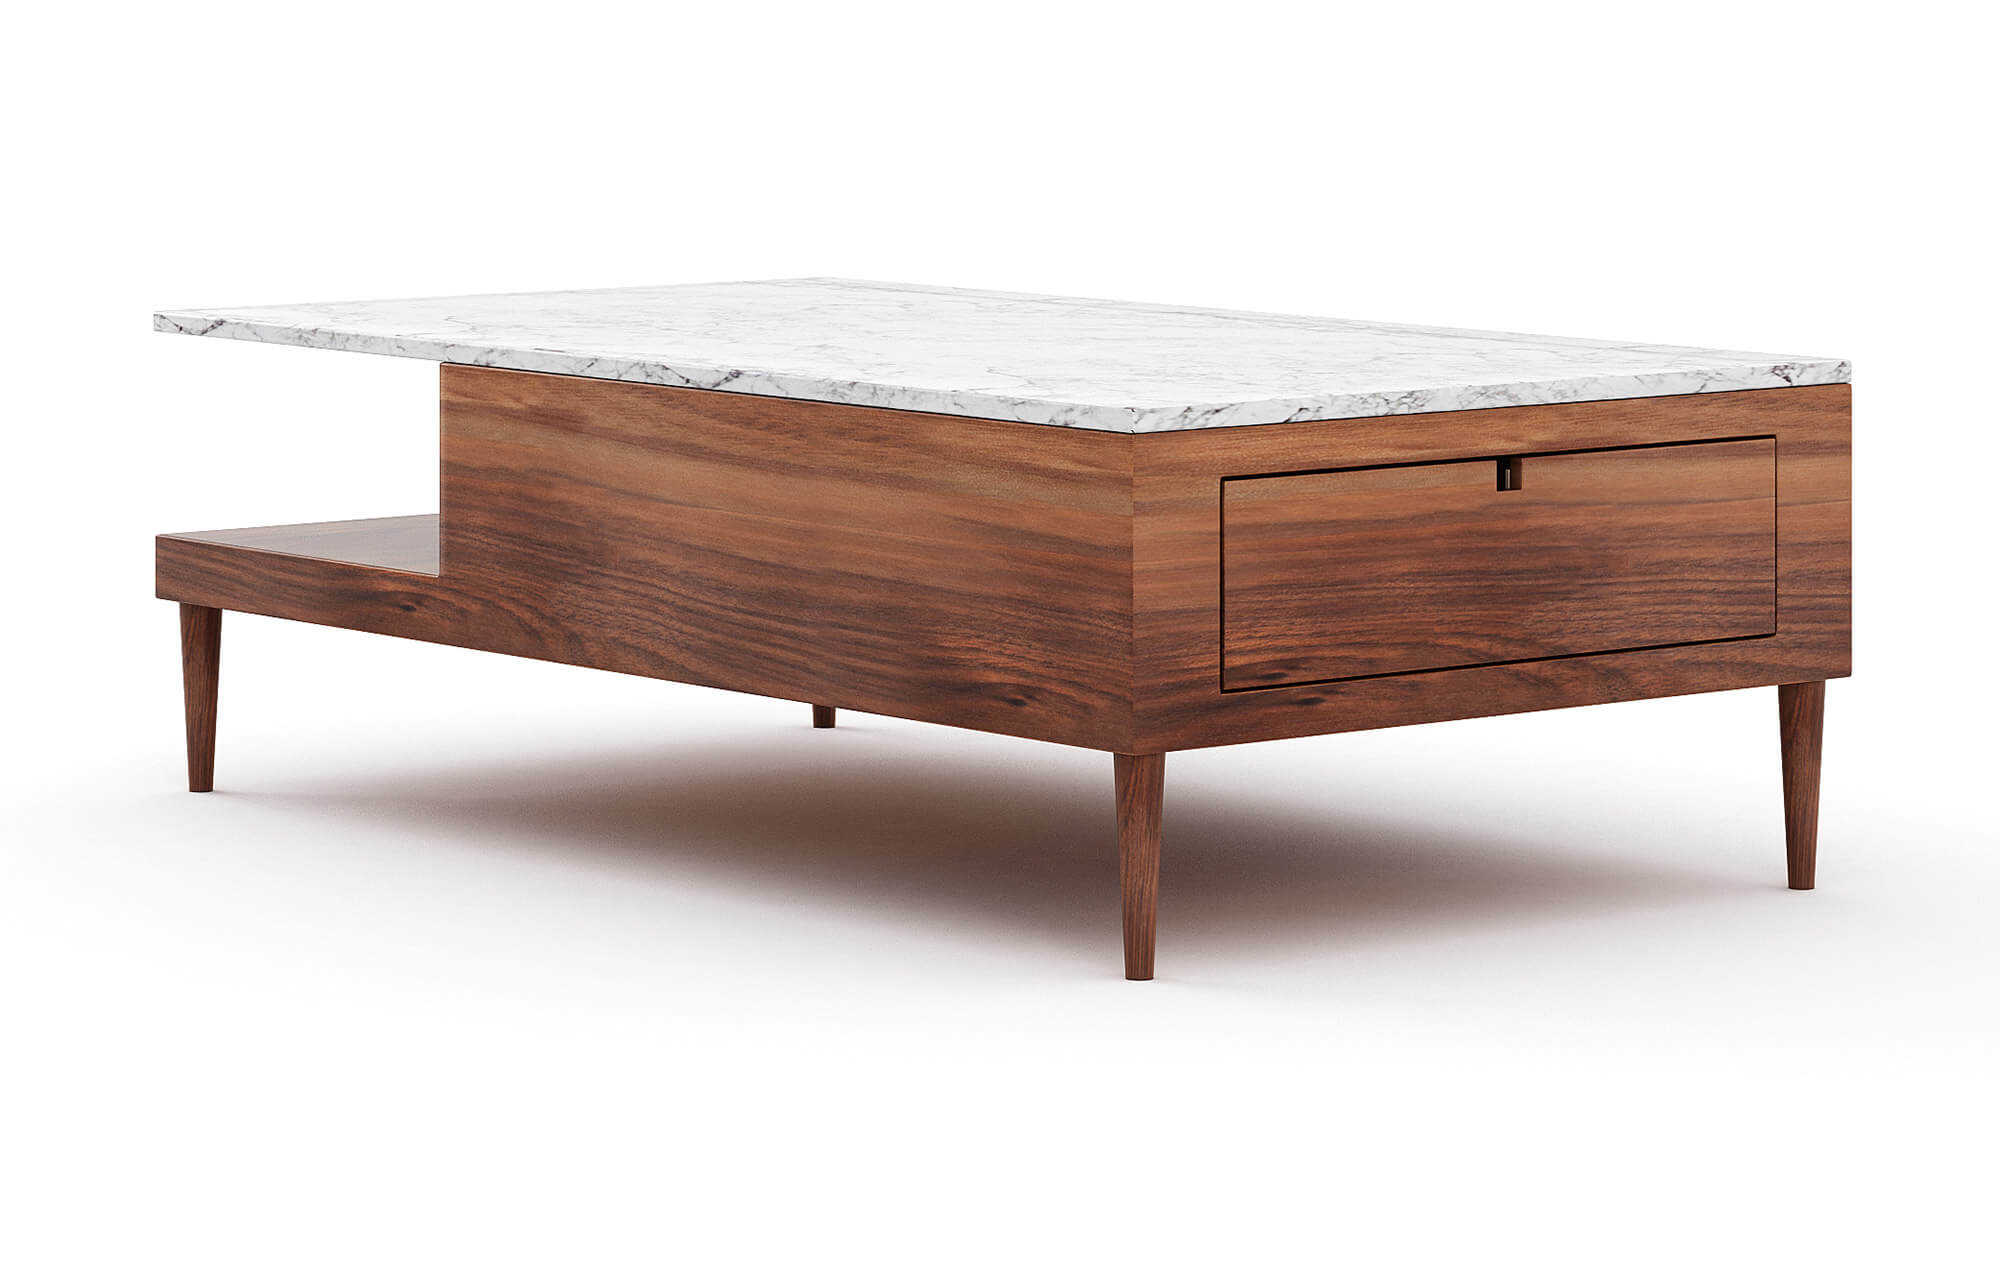 G: 53" x 30" size shown in walnut with the drawer option